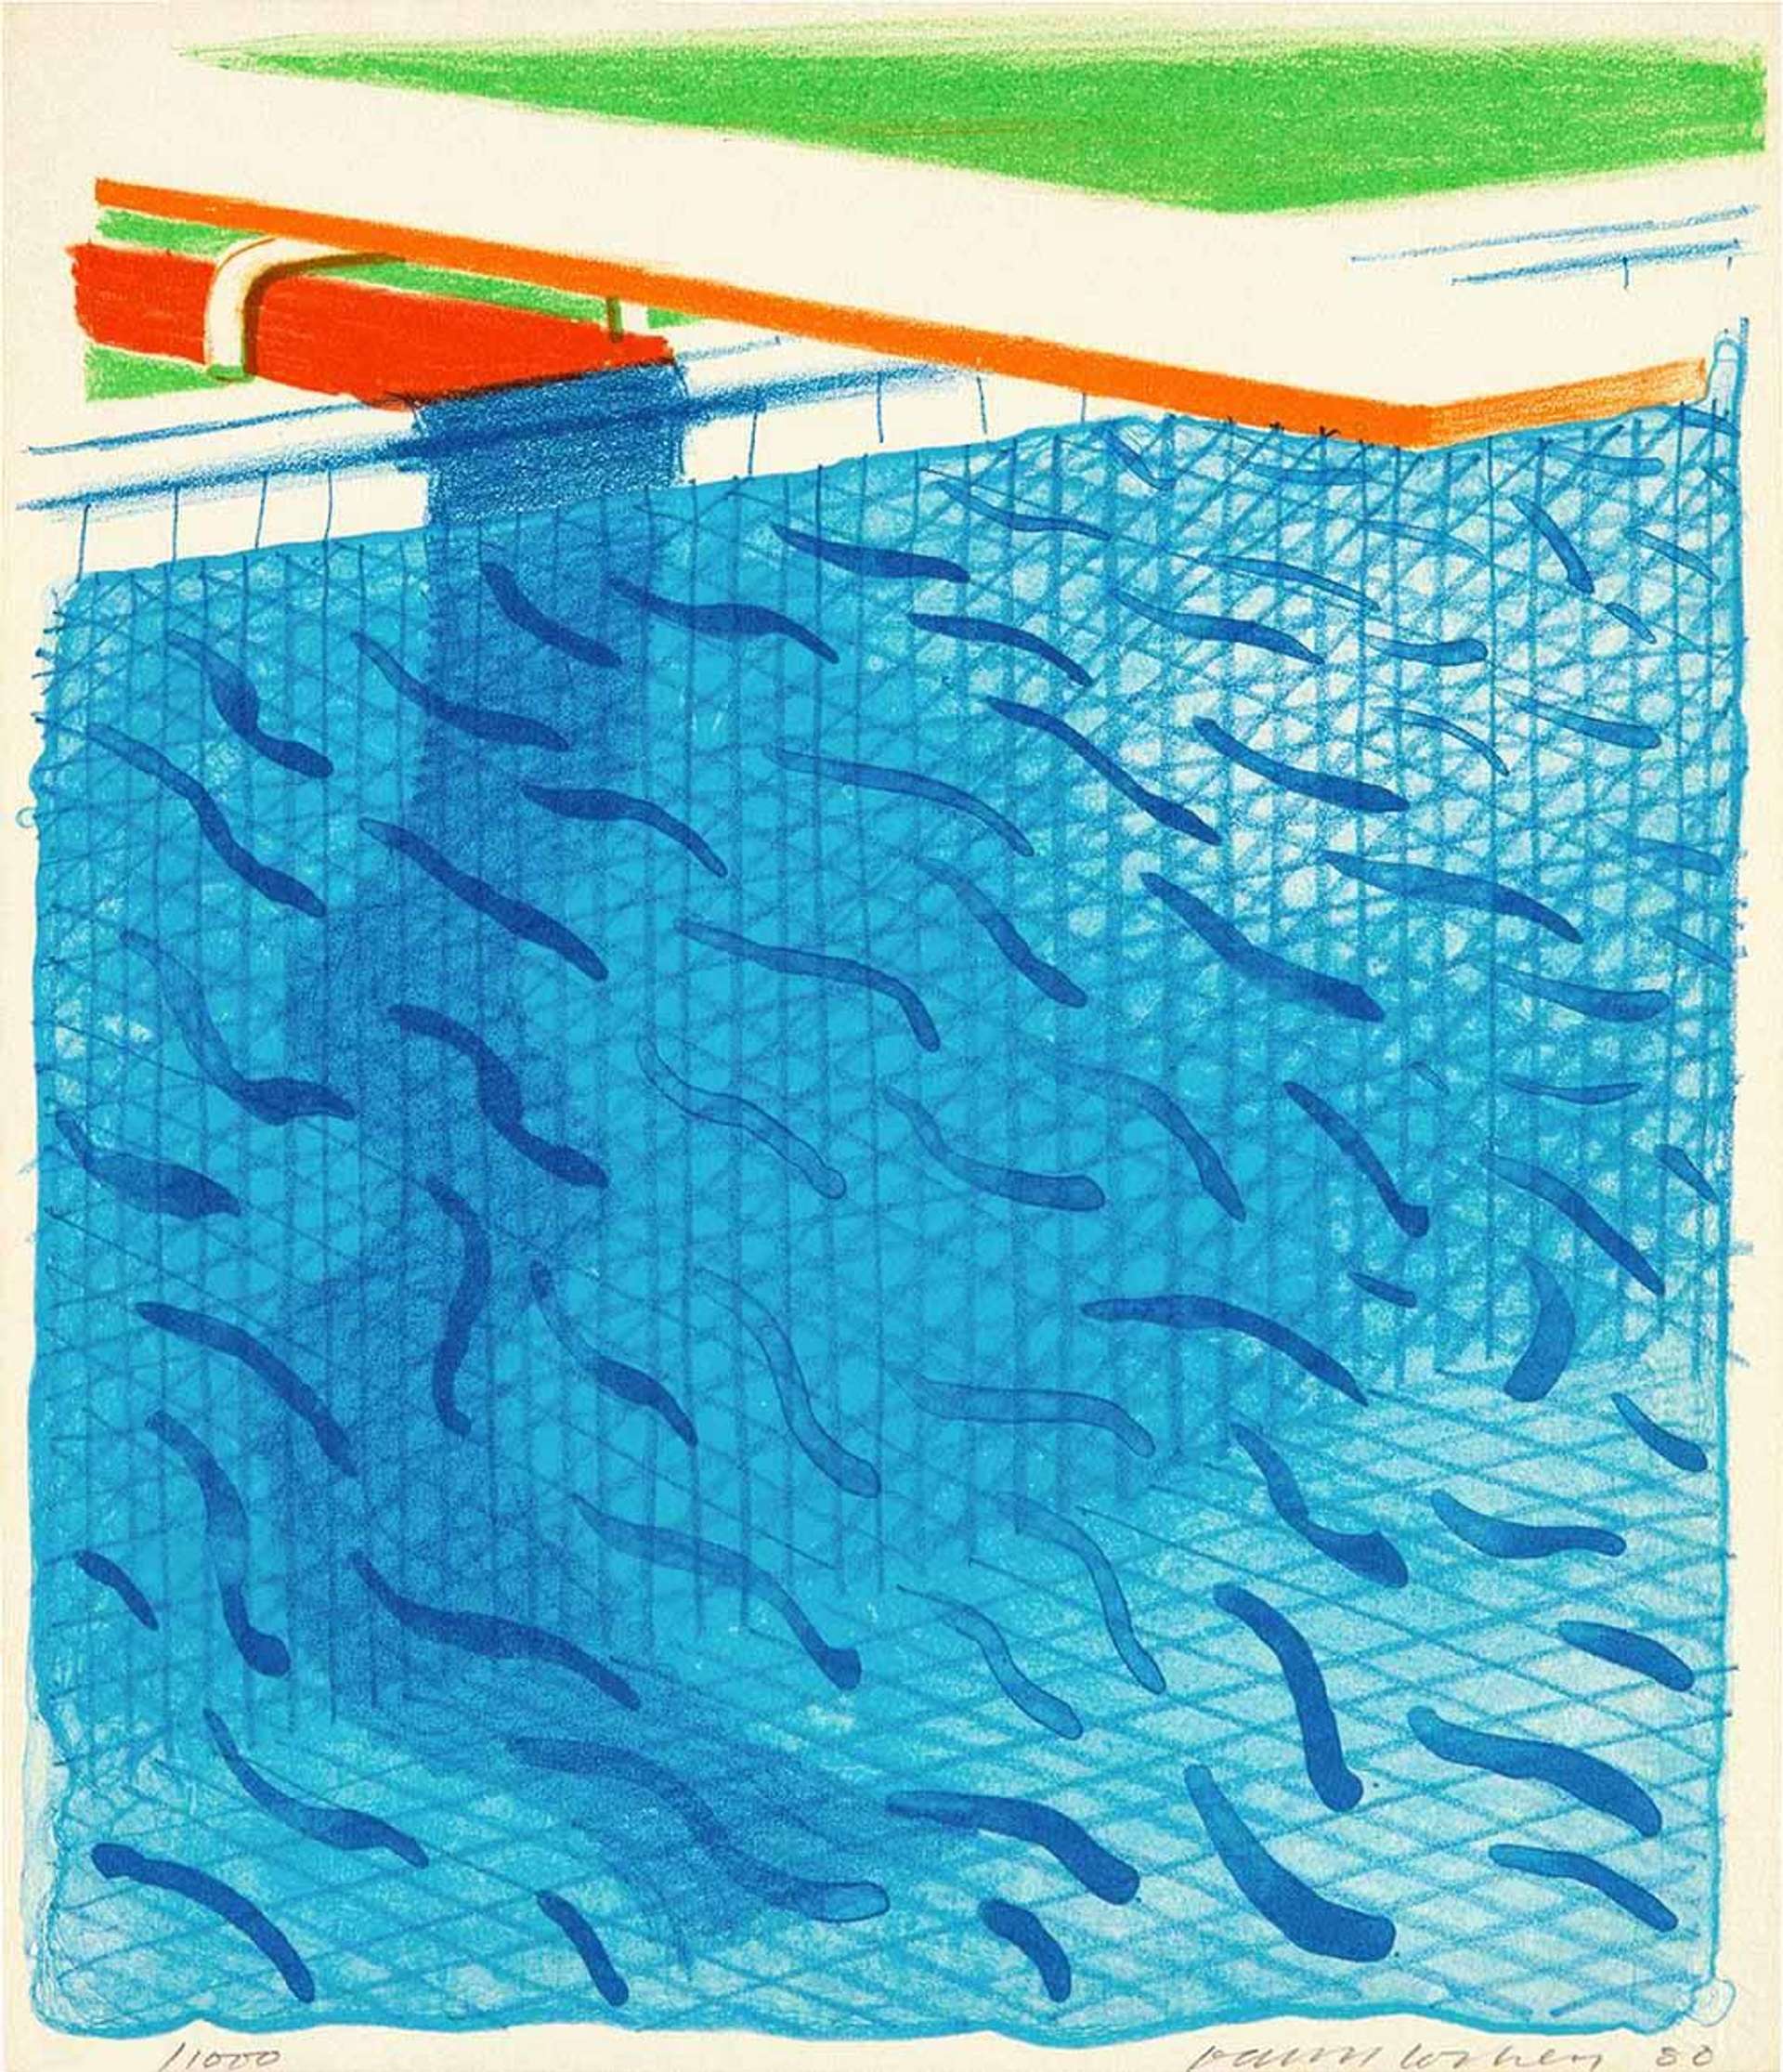 David Hockney: Pool Made With Paper And Blue Ink For Book - Signed Print